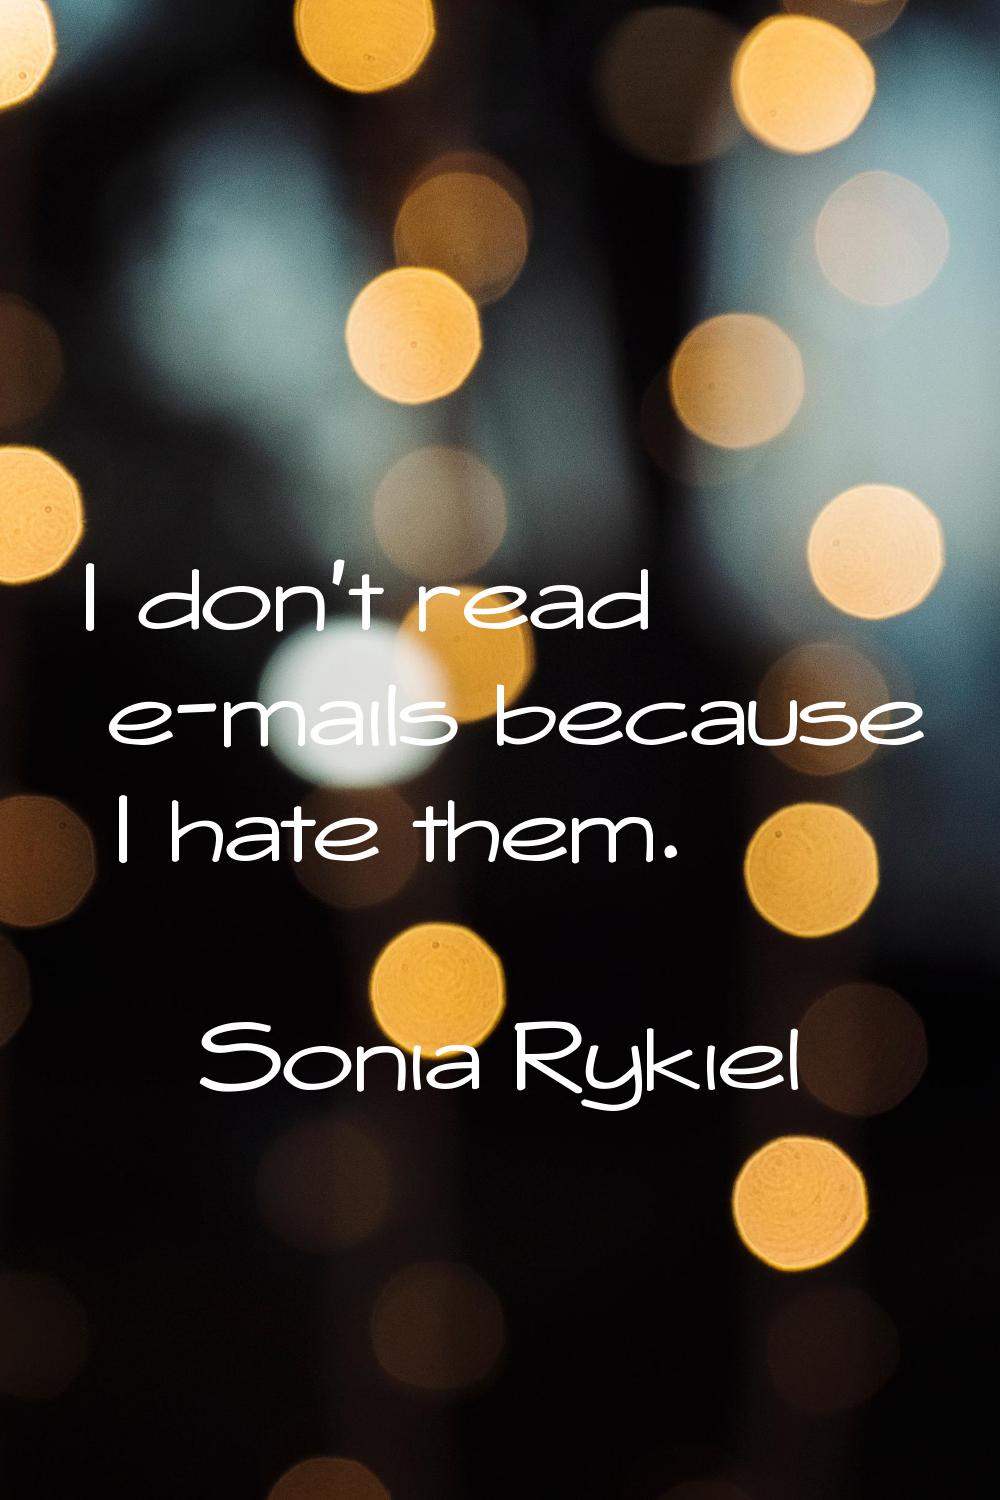 I don't read e-mails because I hate them.